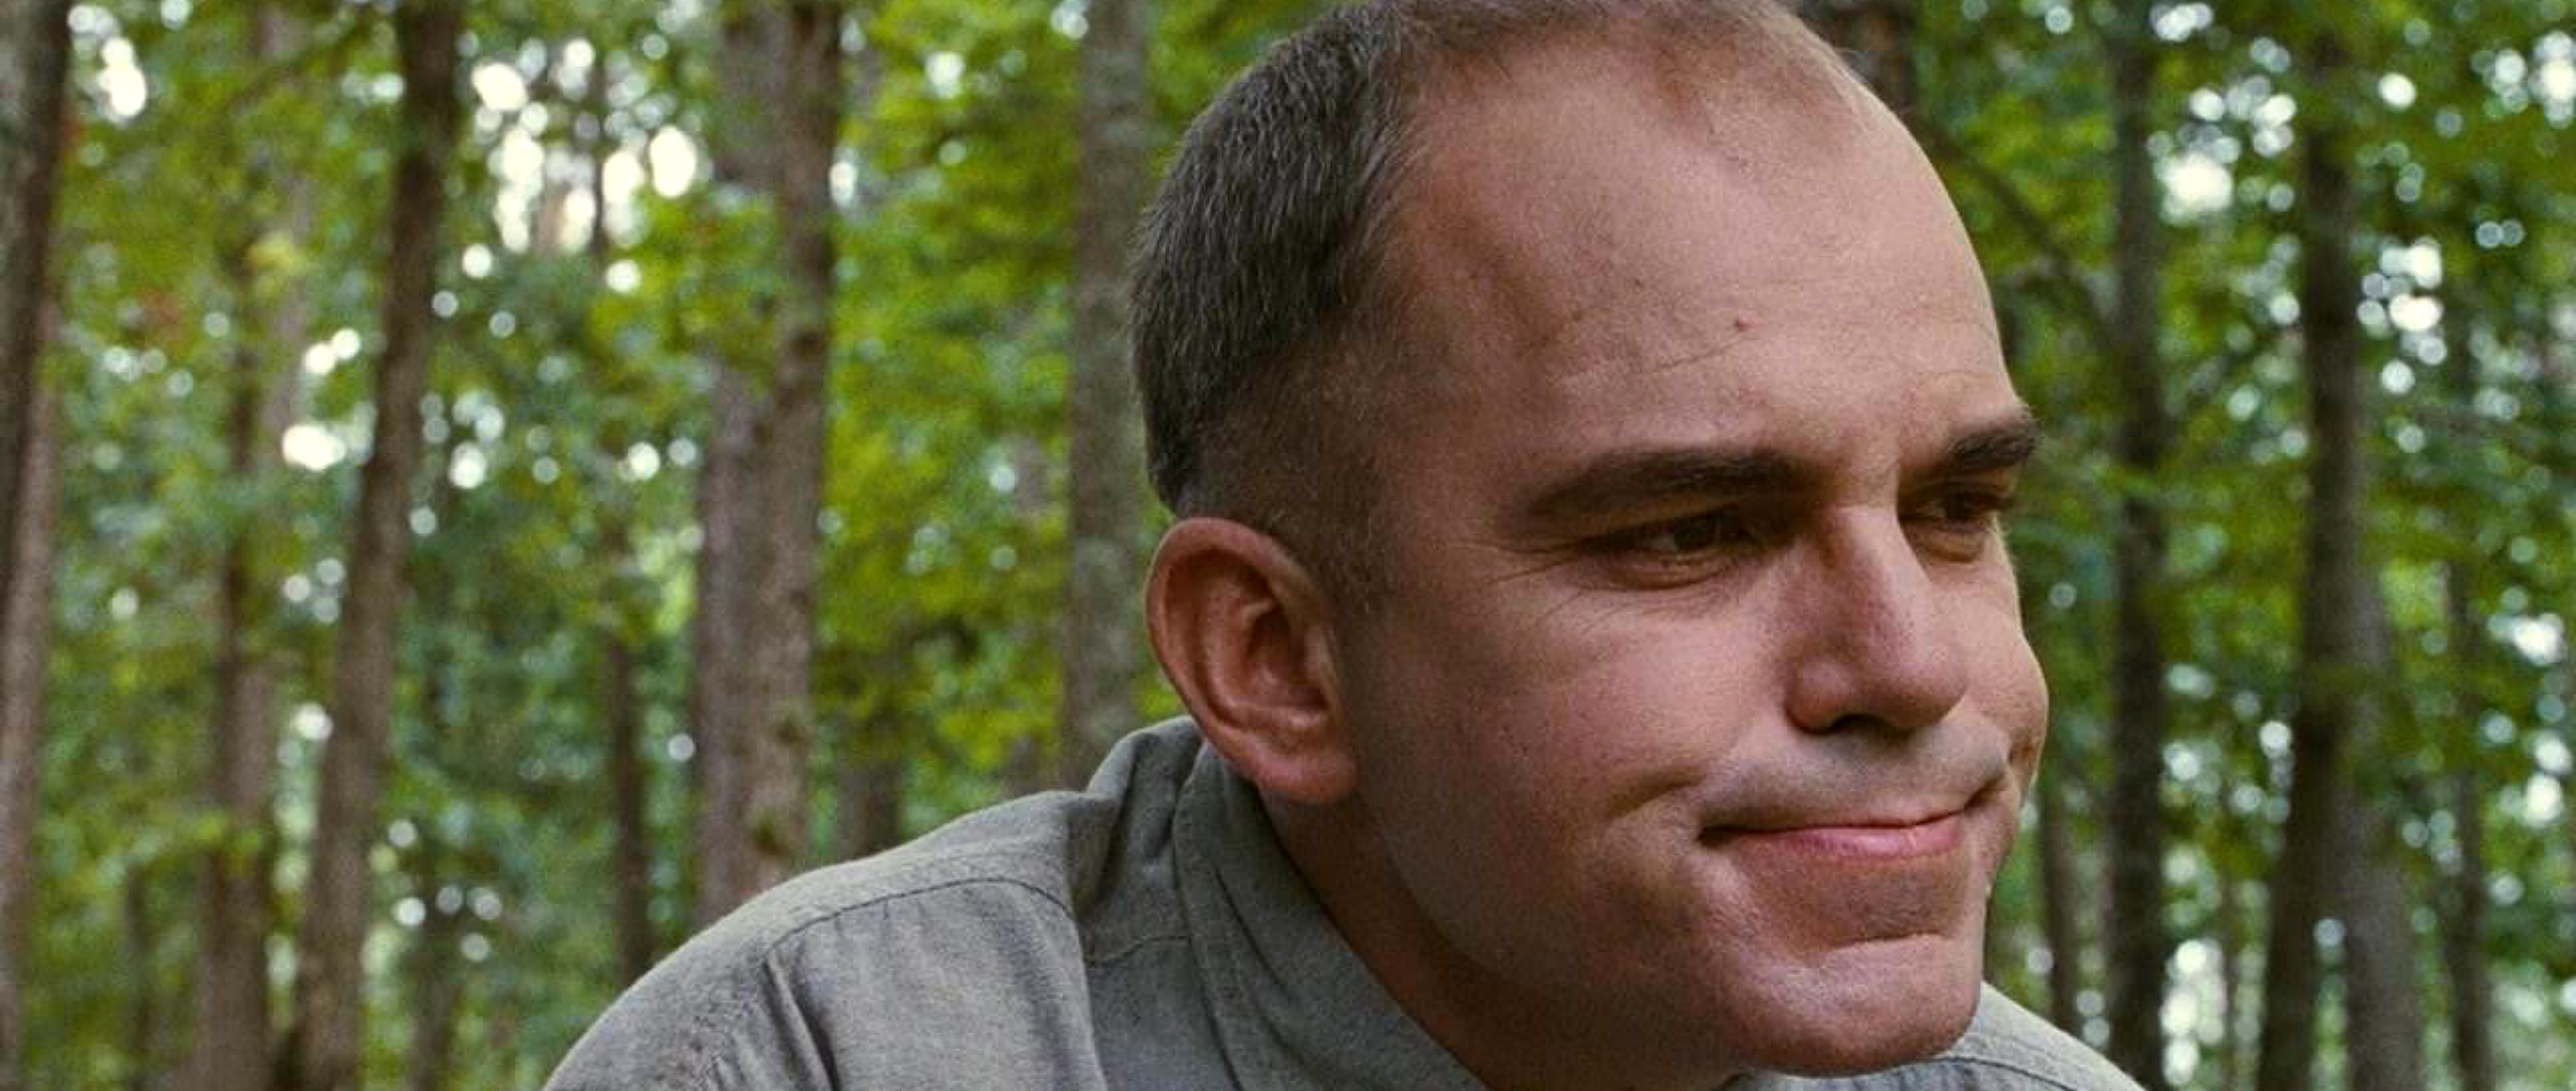 Sling Blade wallpapers, Movie, HQ Sling Blade pictures 4K Wallpapers 2019